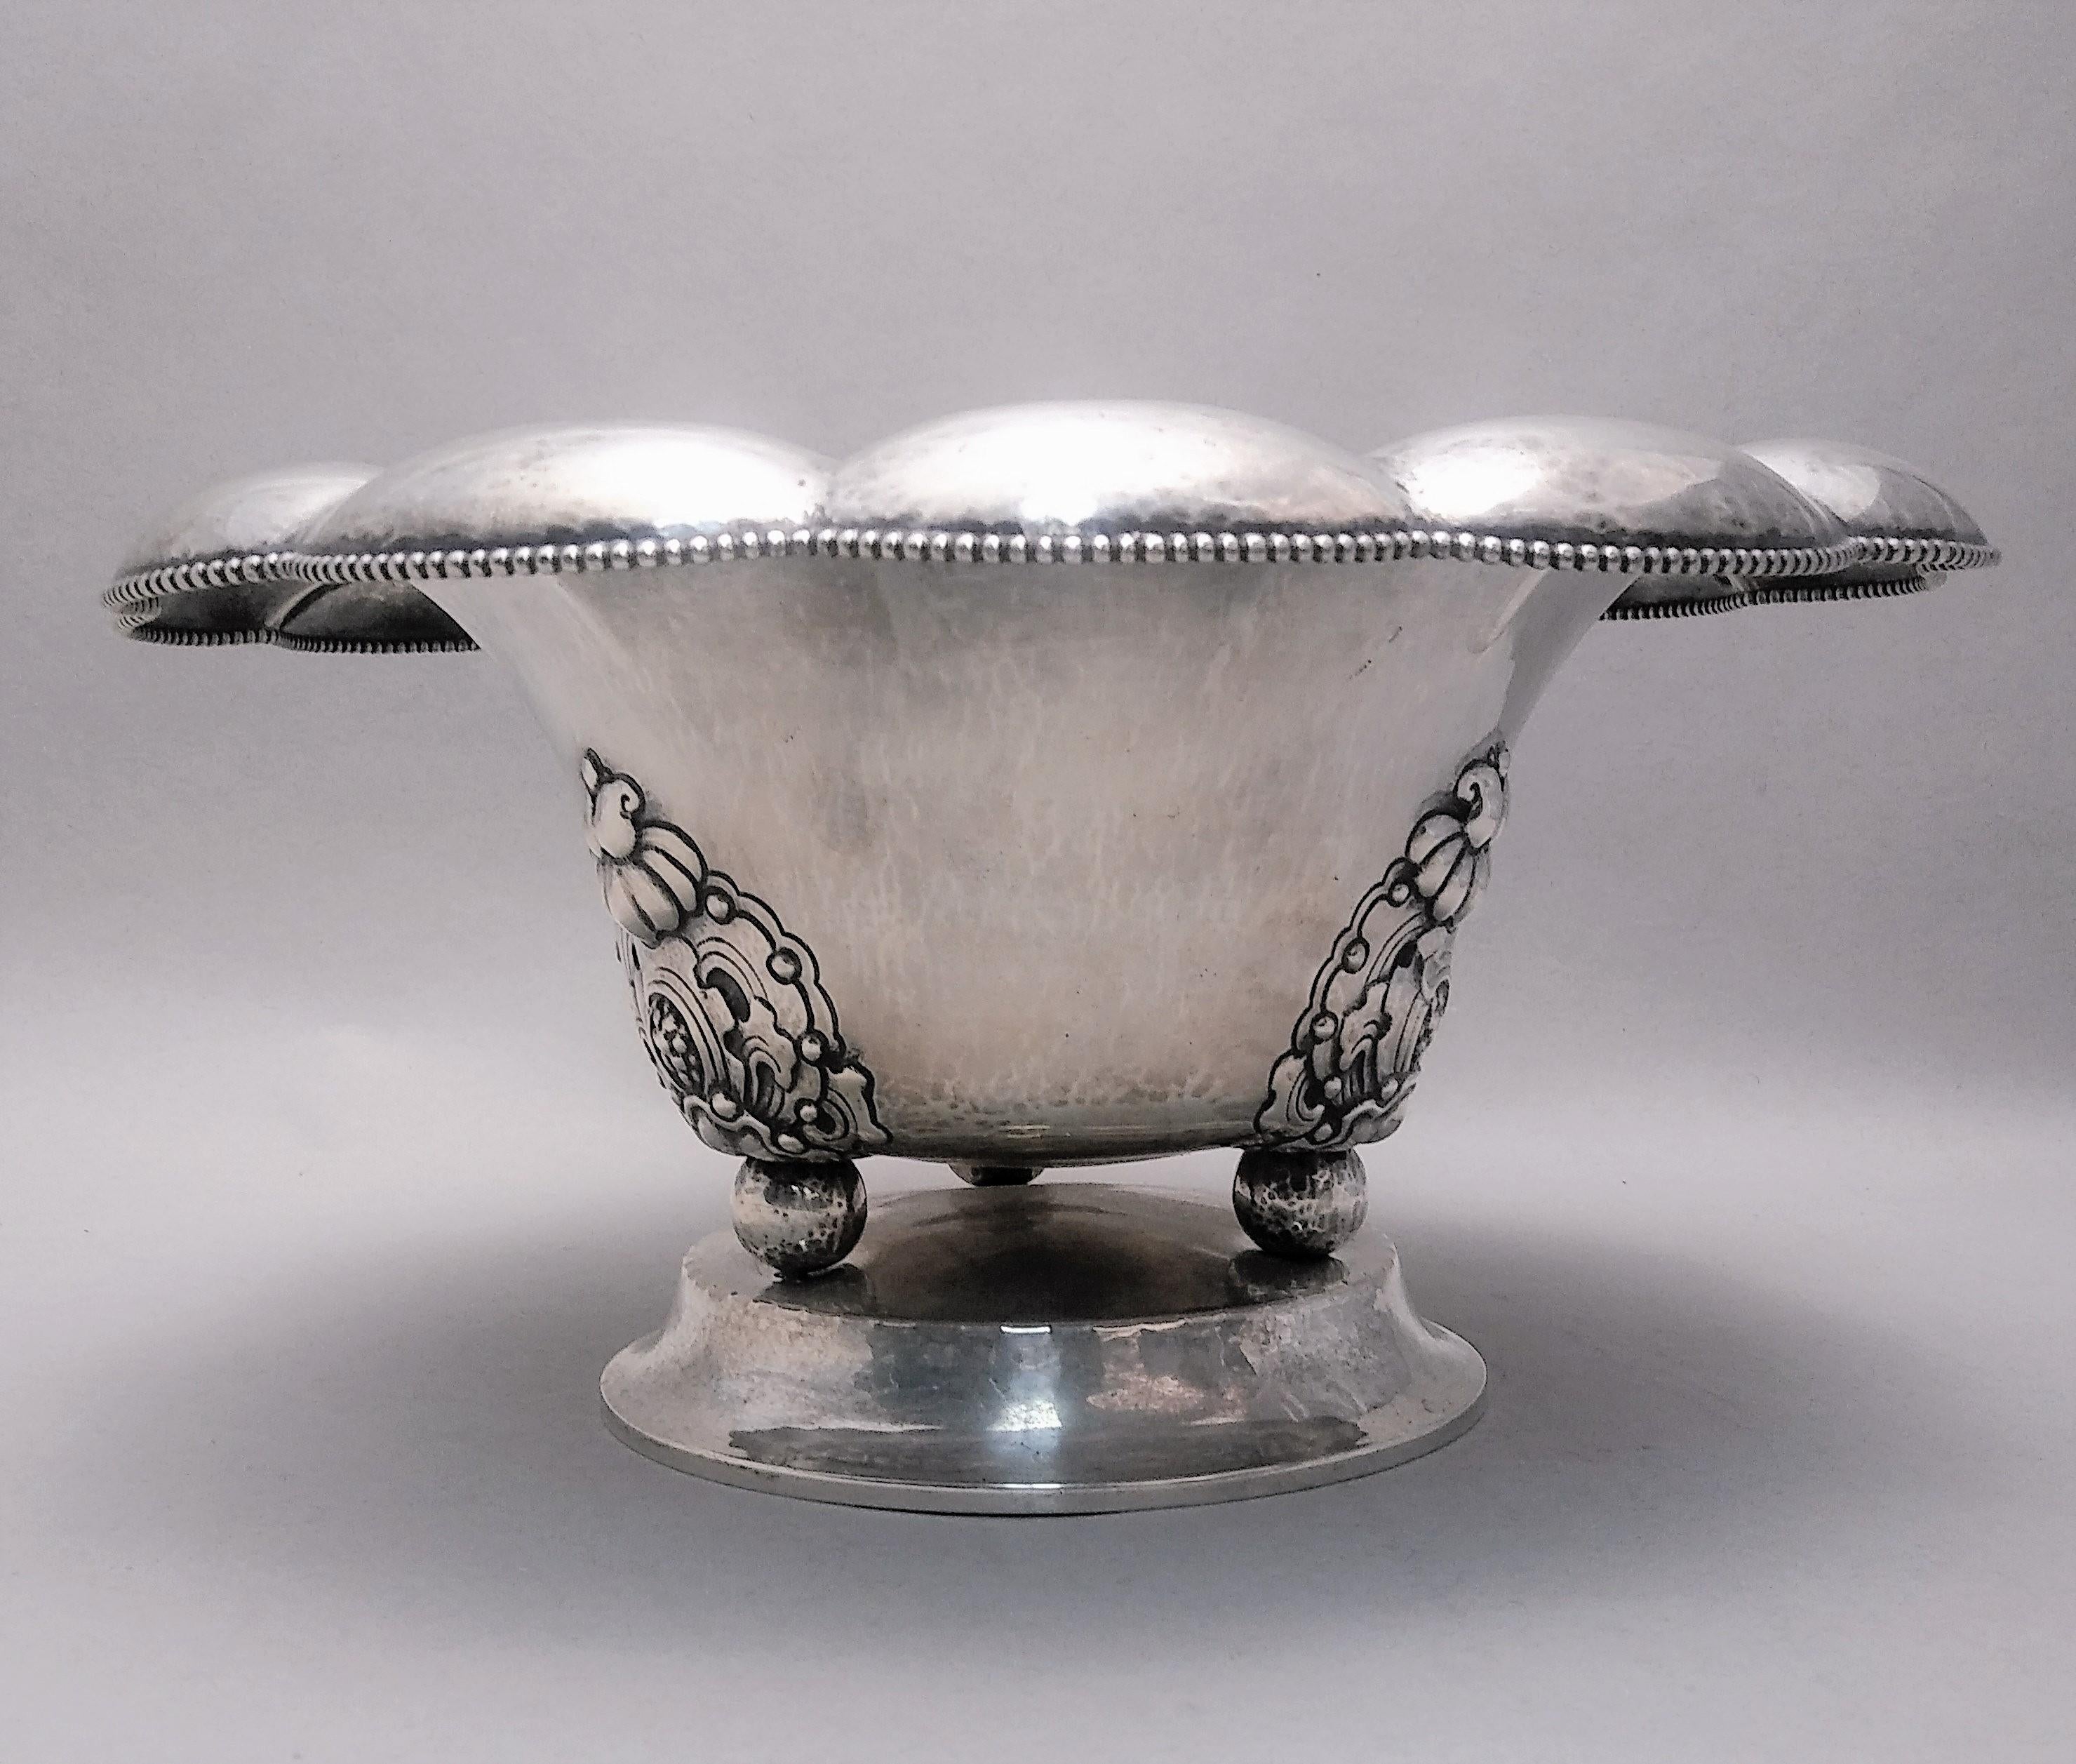 Early 20th century Norwegian 0.830 silver centerpiece by David Andersen. Designed with a beautiful flower border and beading going around. Three flower and leaf pattern around outside of bowl, standing on three balled feet on top of base. Measuring